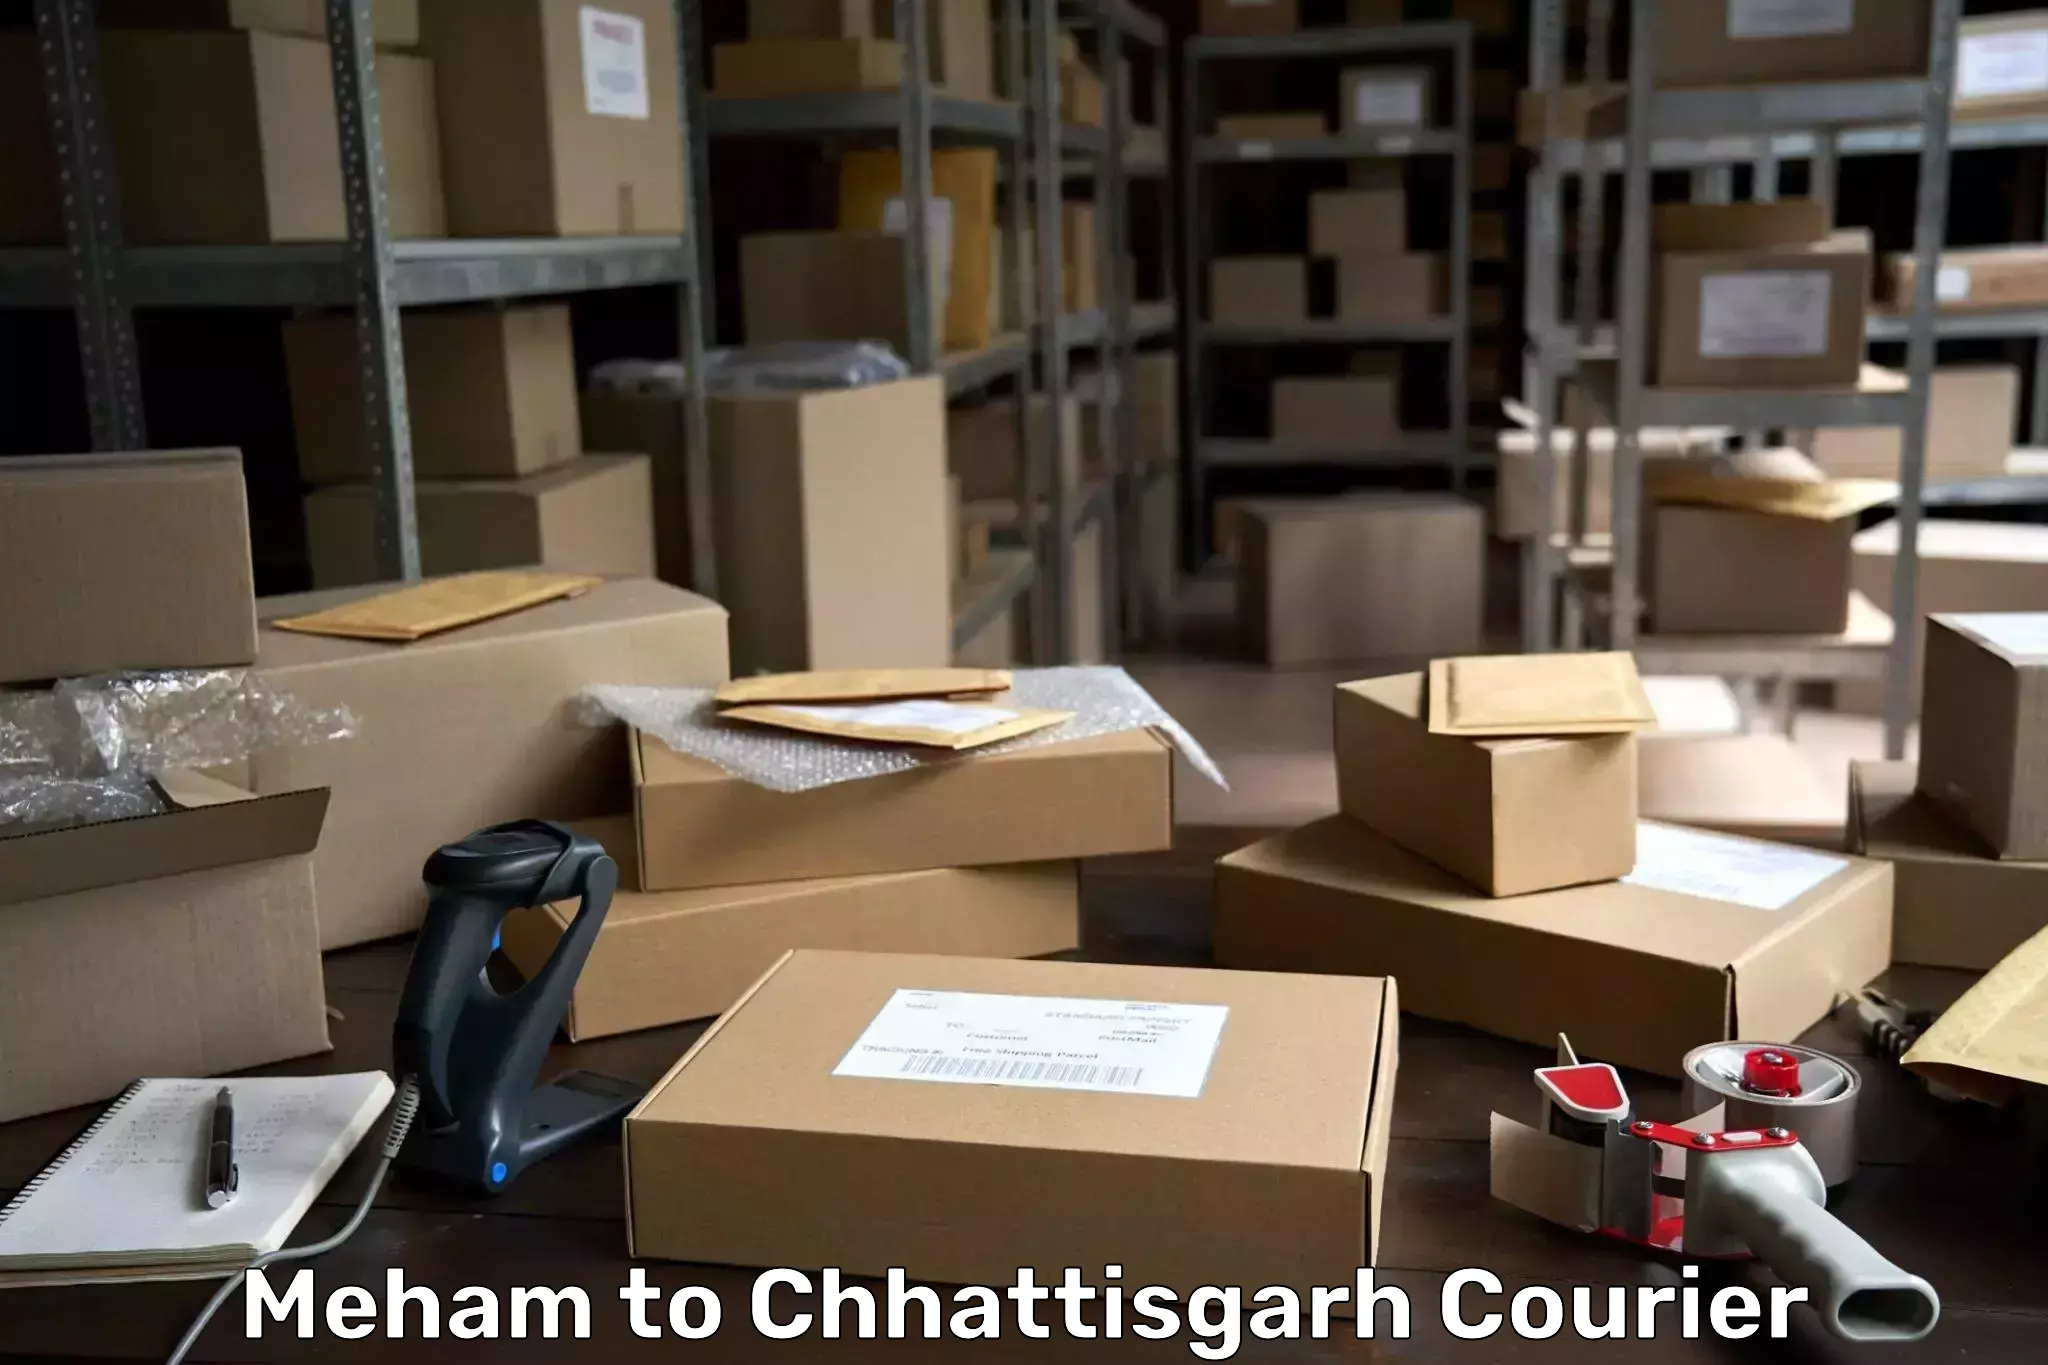 Reliable delivery network Meham to Chhattisgarh